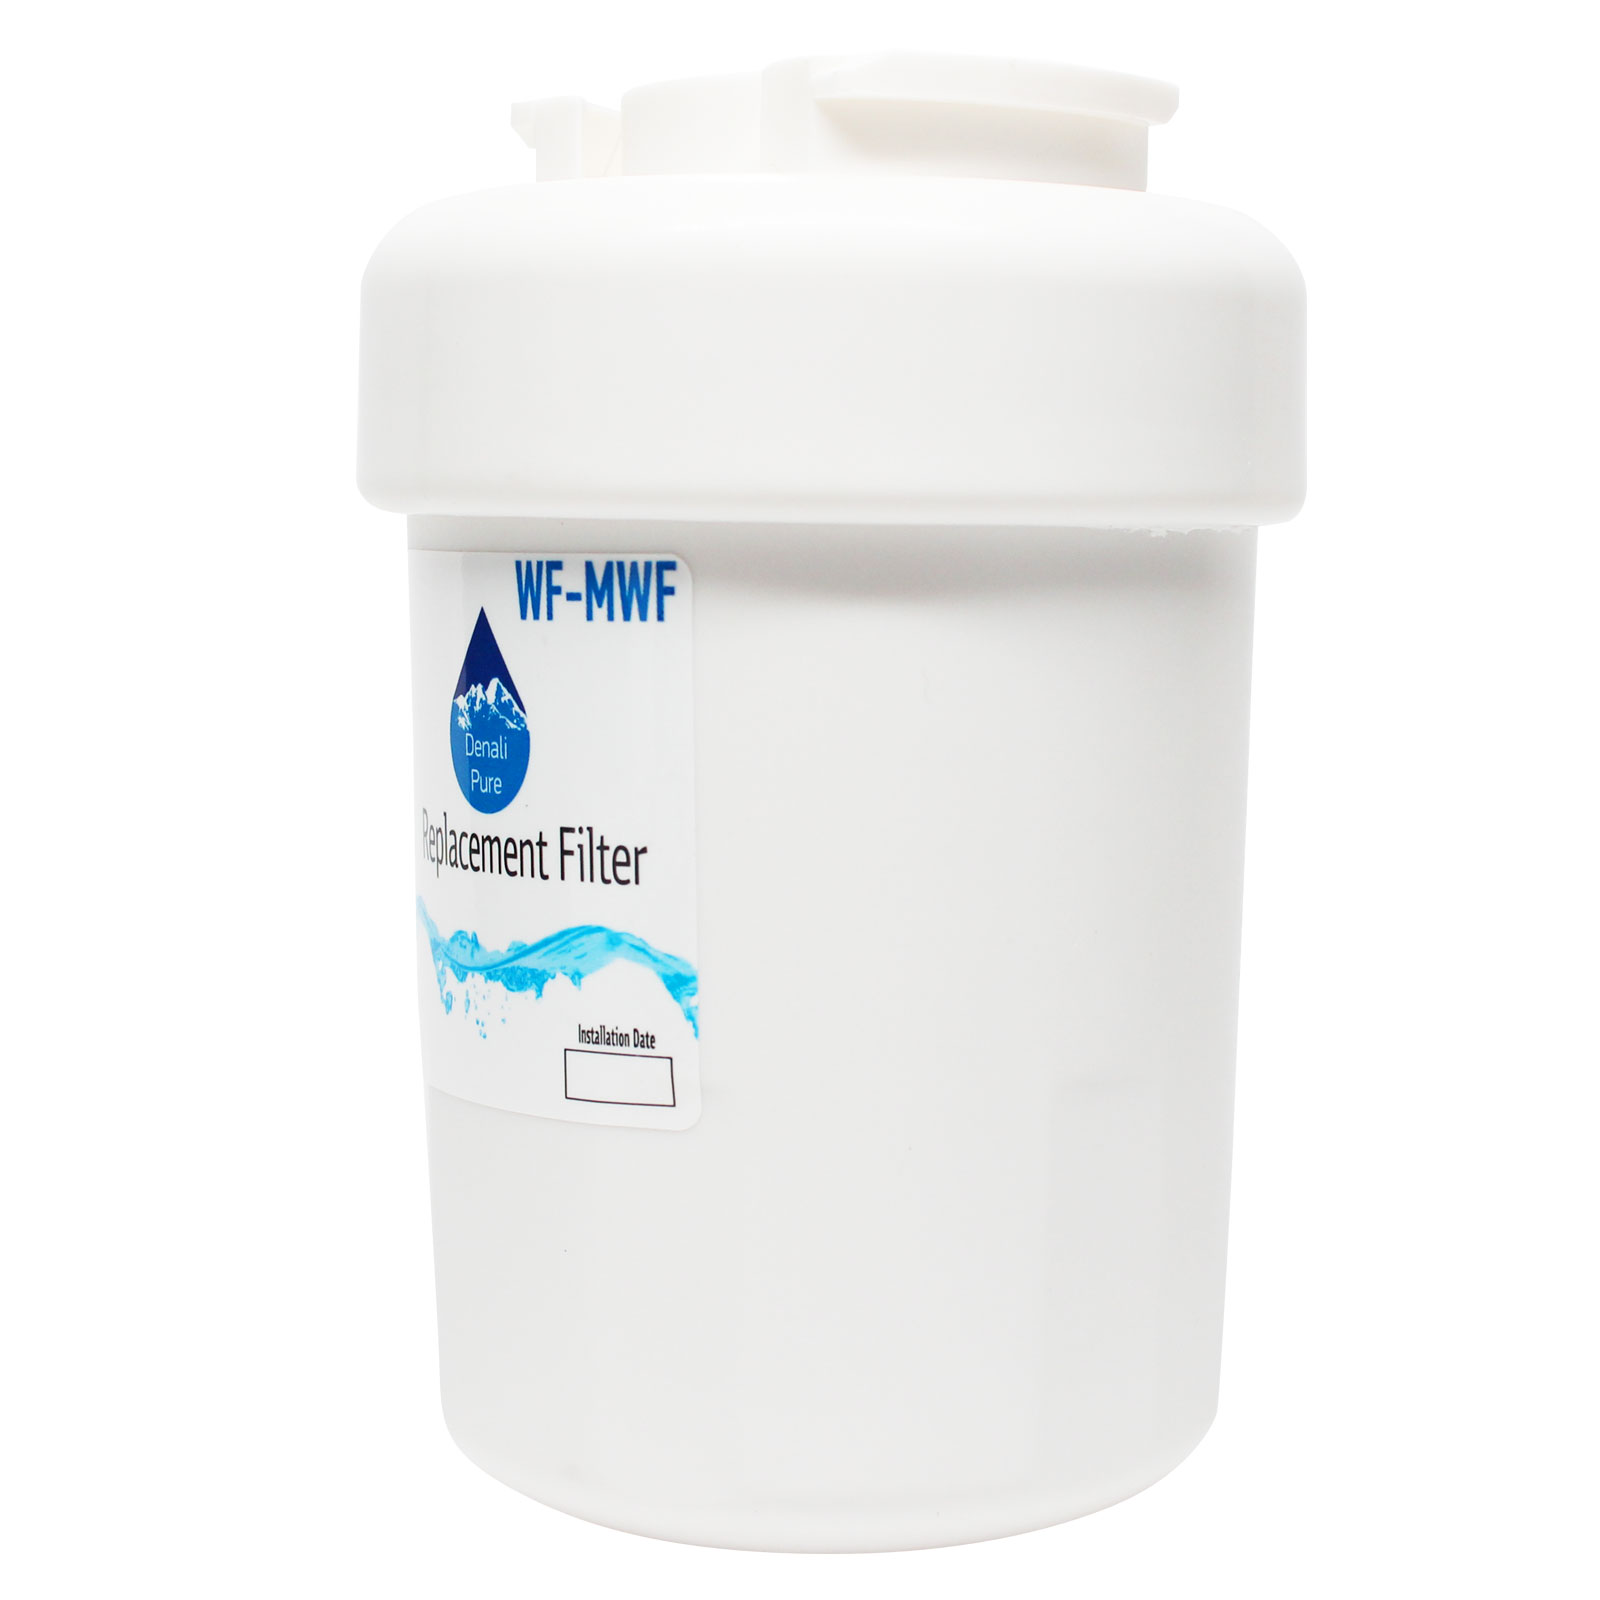 Replacement General Electric GSS25QGSCBB Refrigerator Water Filter - Compatible General Electric MWF, MWFP Fridge Water Filter Cartridge - Denali Pure Brand - image 3 of 3